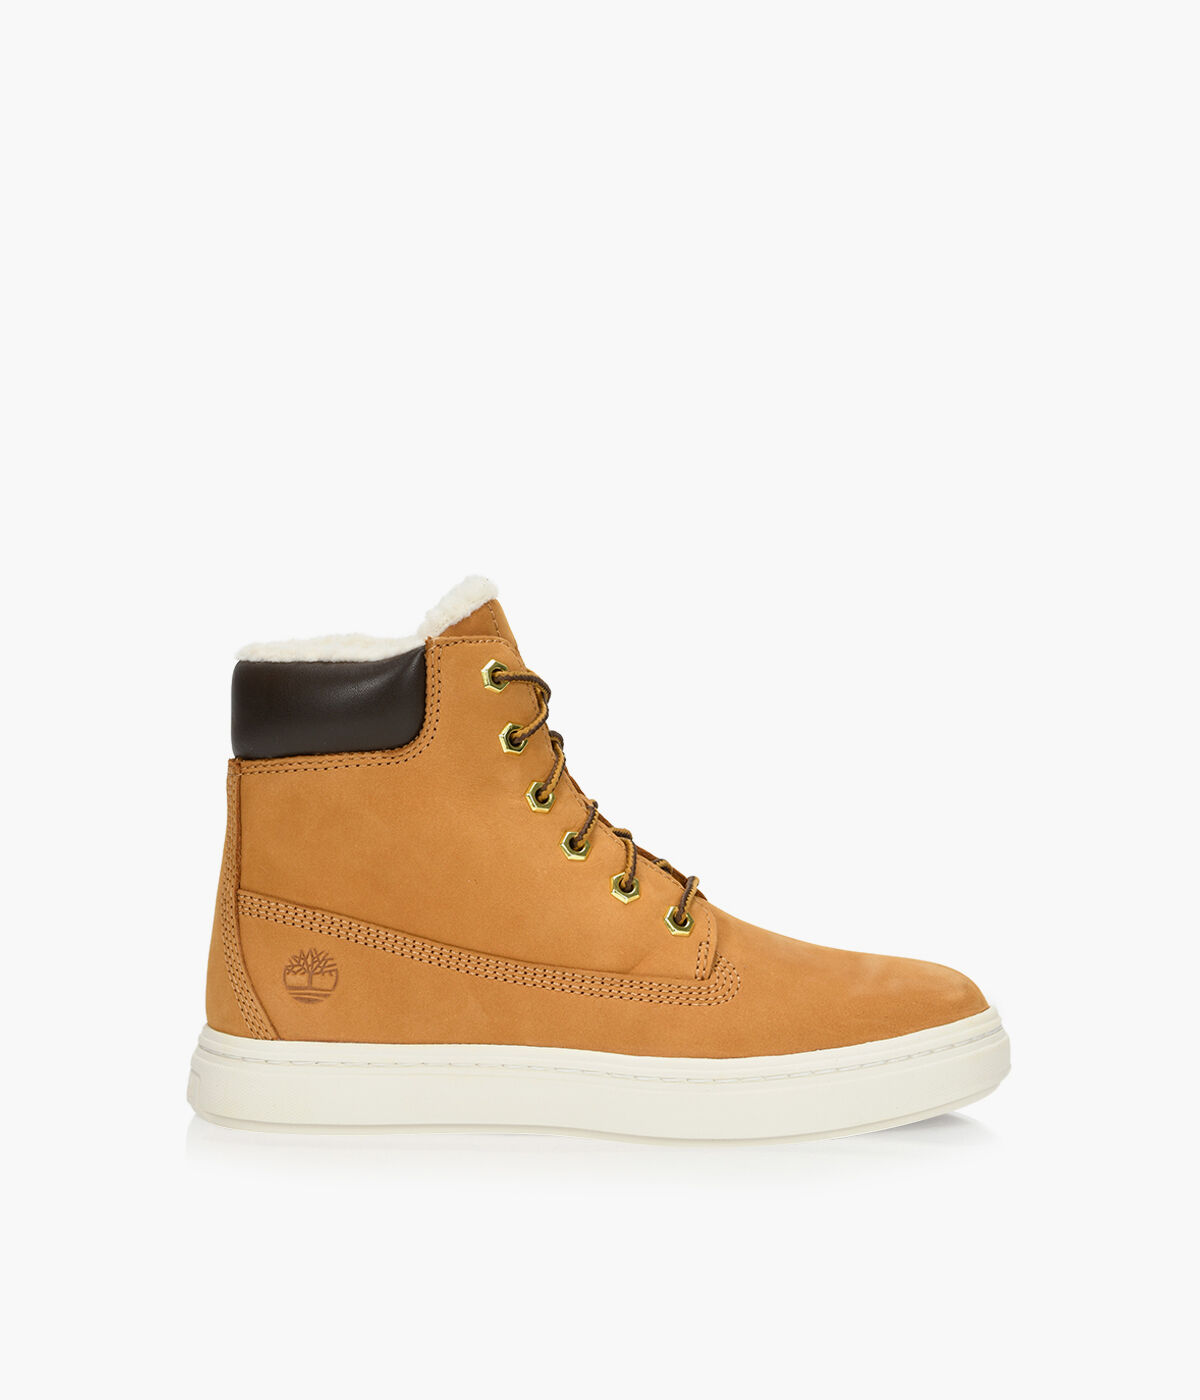 timberland londyn warm lined 6